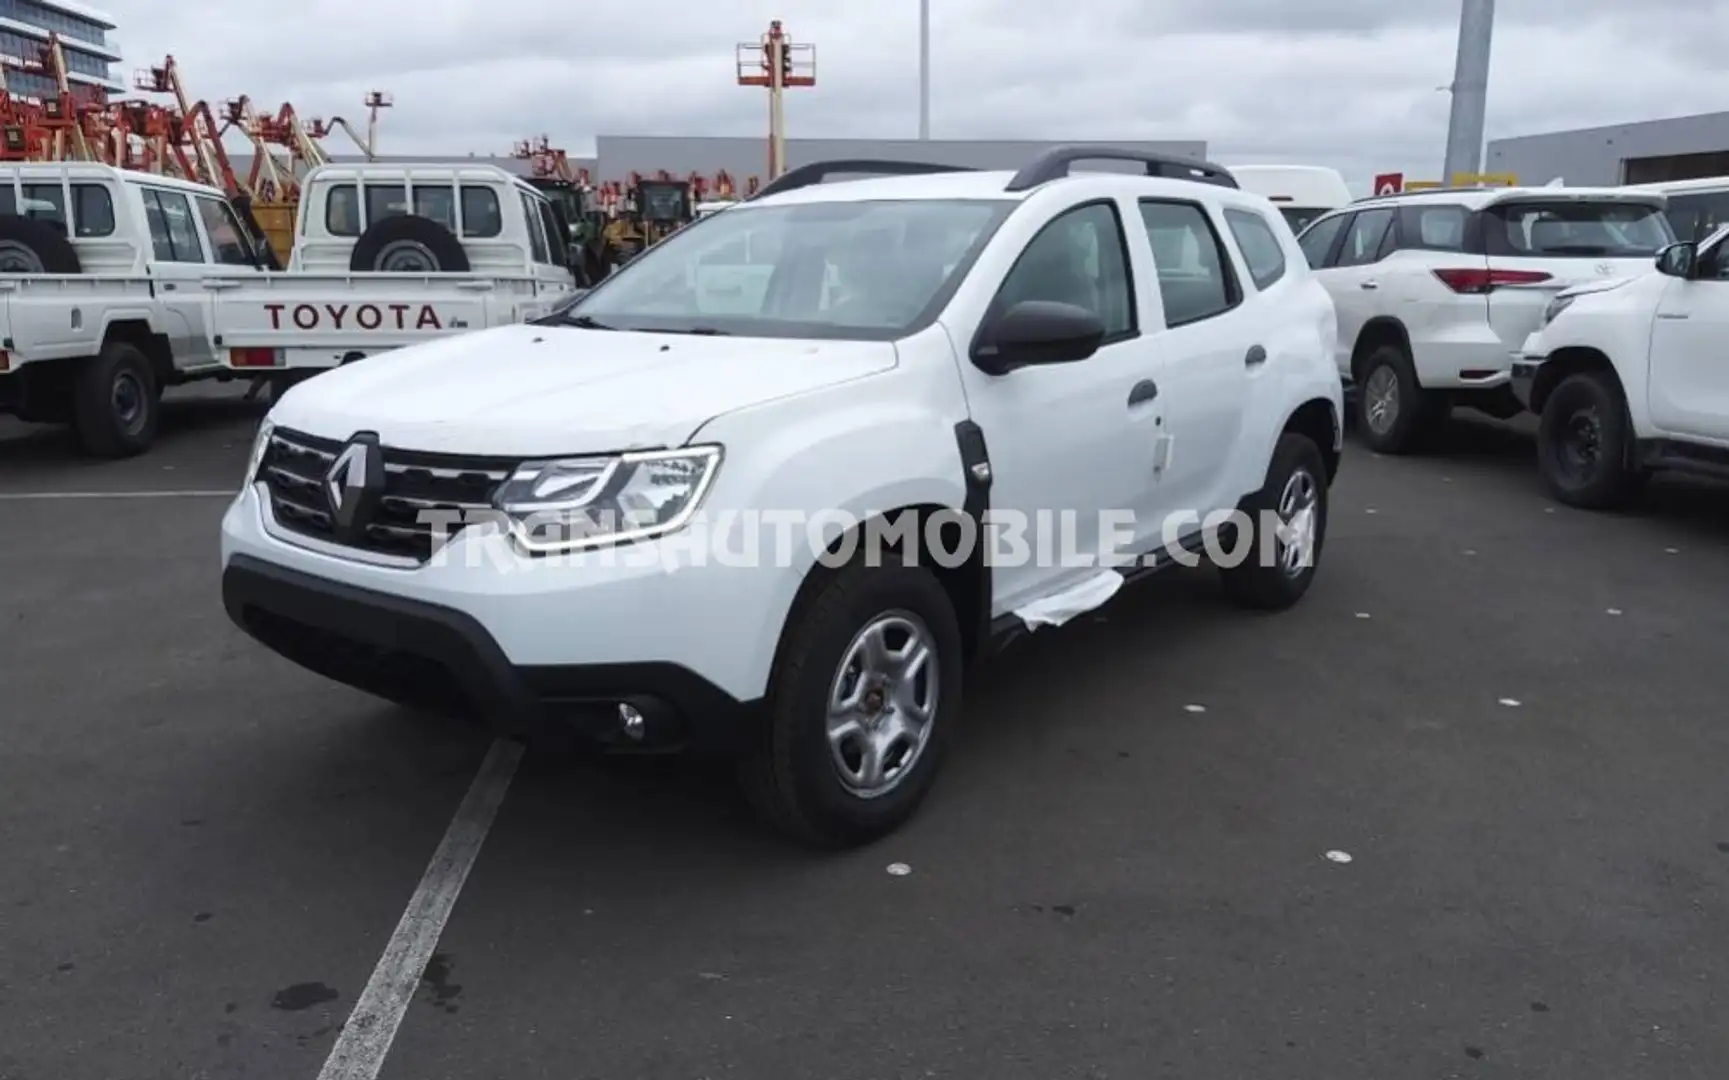 Renault Duster Standard - EXPORT OUT EU TROPICAL VERSION - EXPORT White - 1